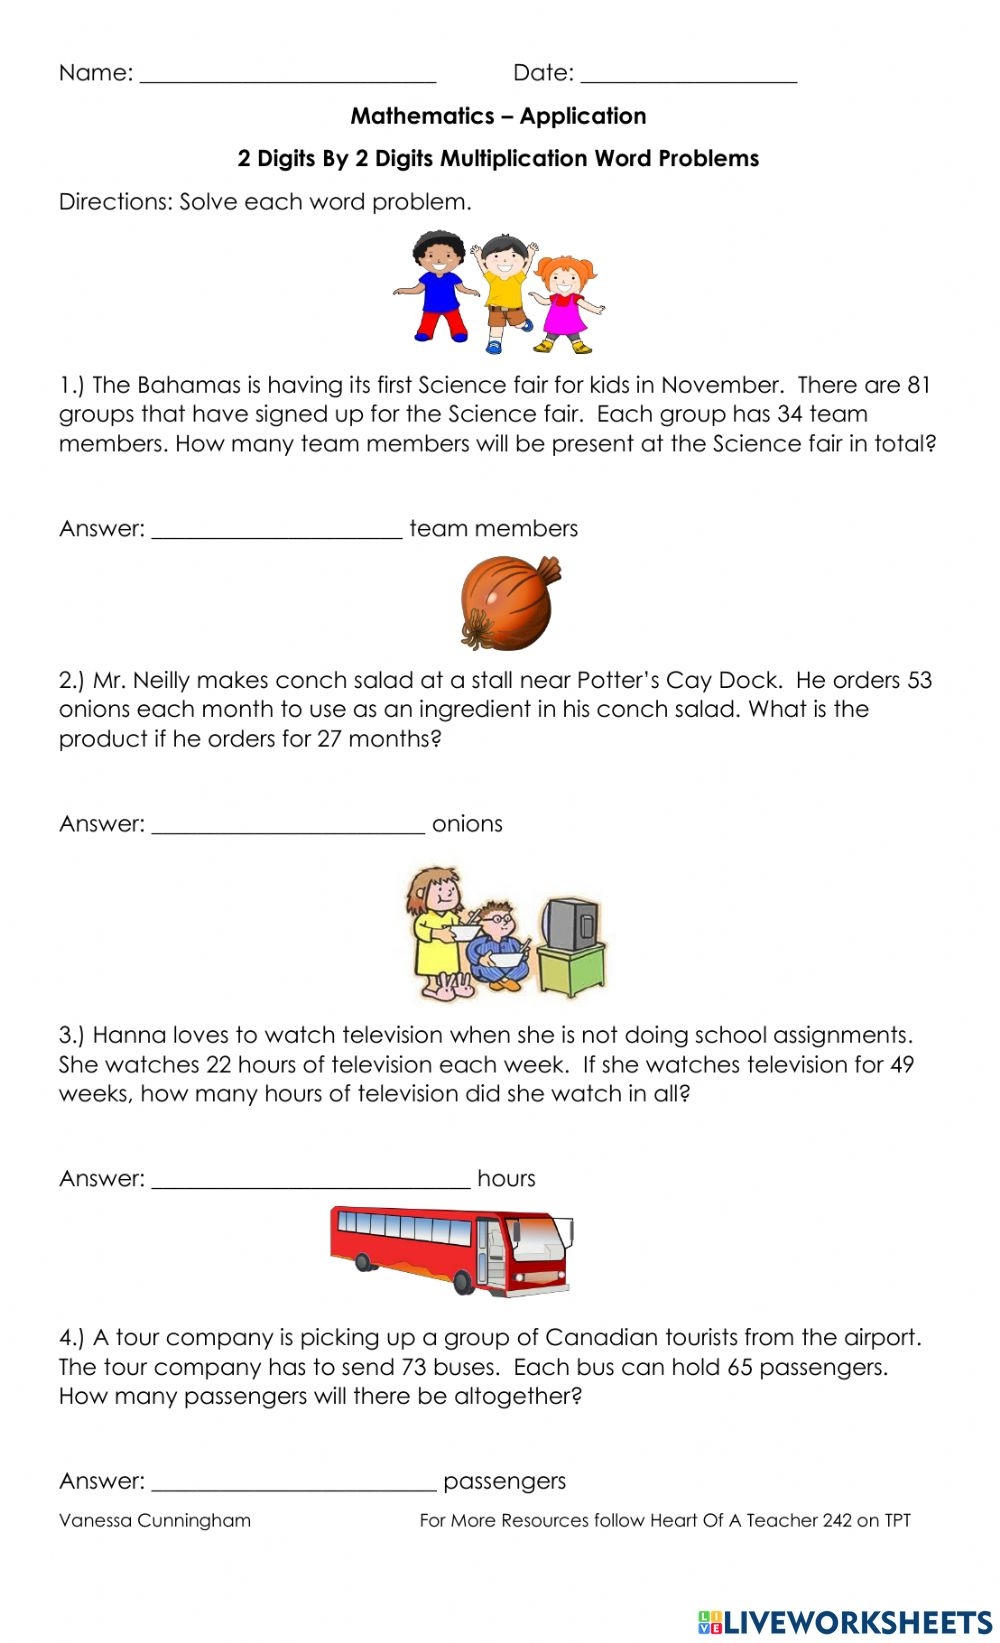 2 Digits By 2 Digits Multiplication Word Problems Worksheet